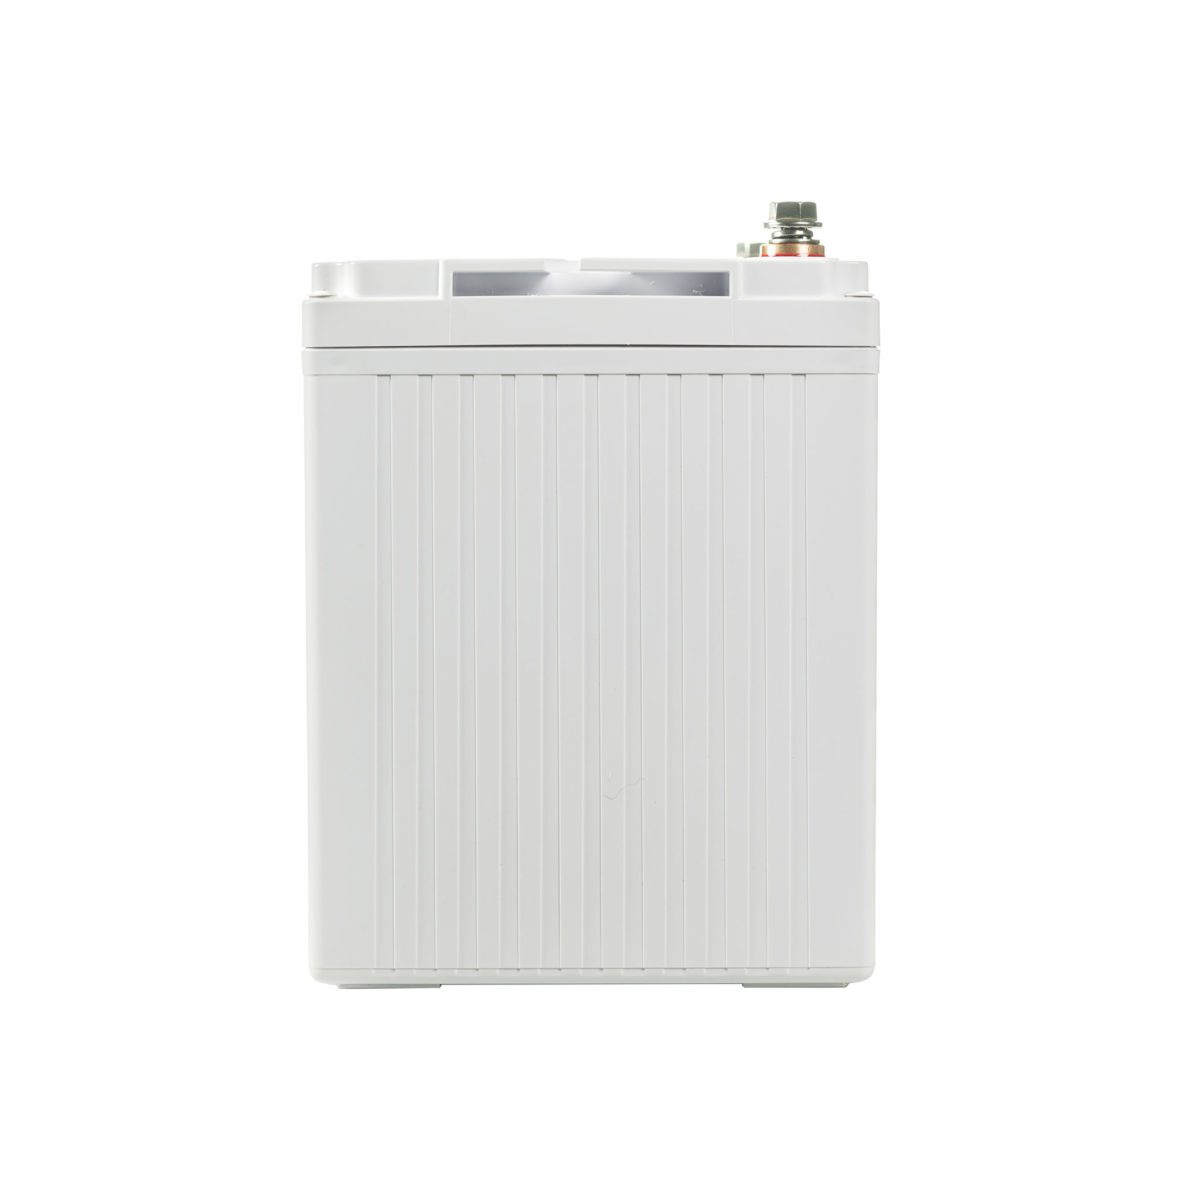 Rebelcell 24V70 battery product image